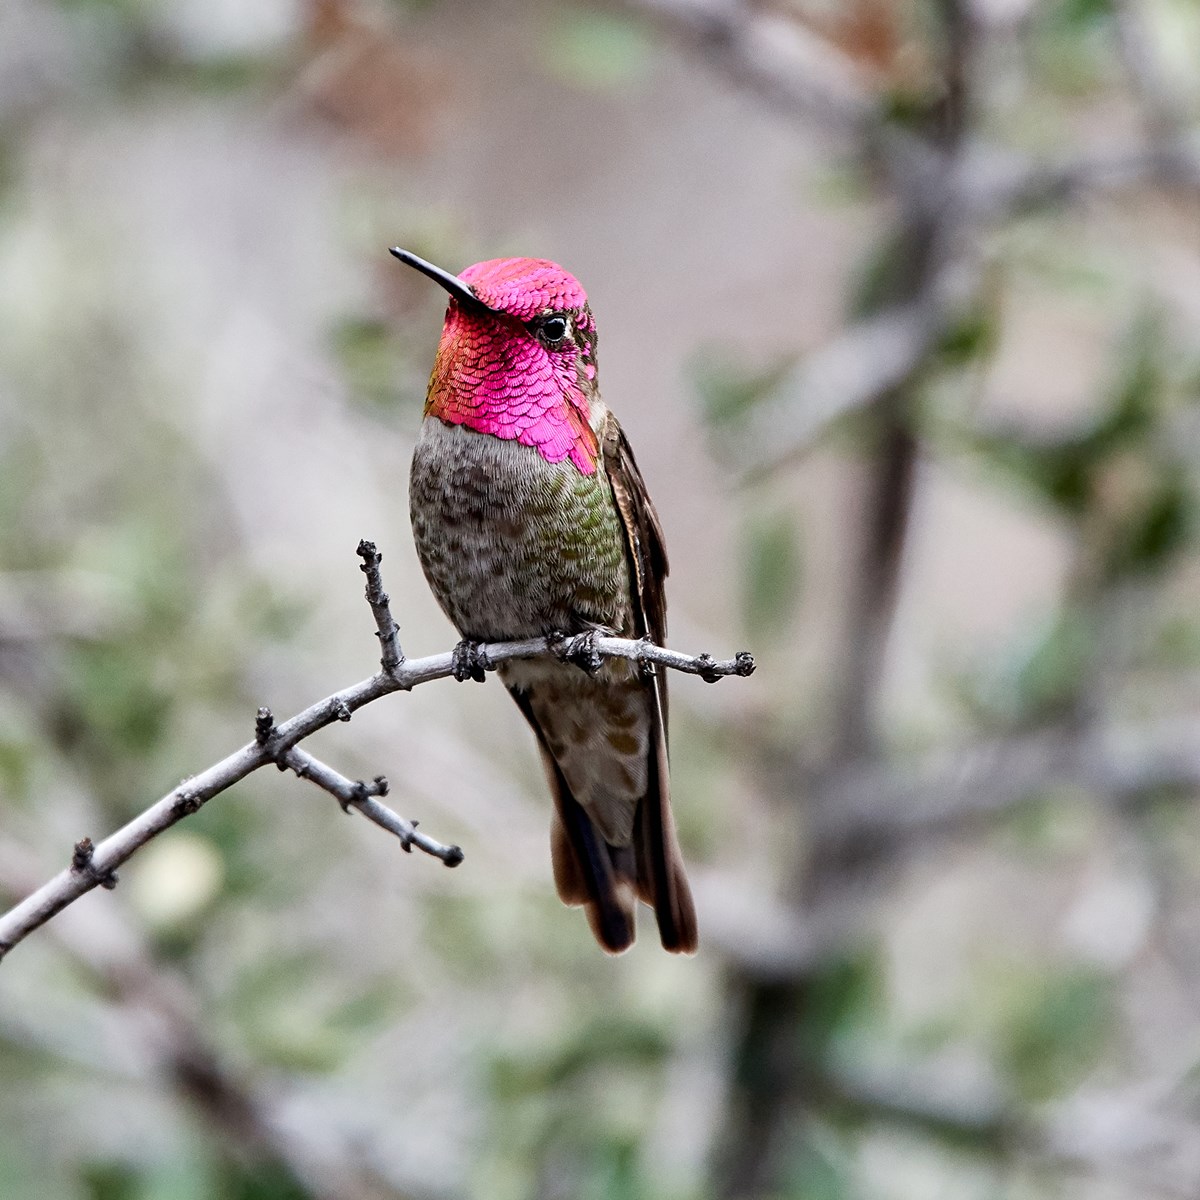 Small, greenish hummingbird with long, narrow bill and iridescent rose-colored feathers on throat and crown.